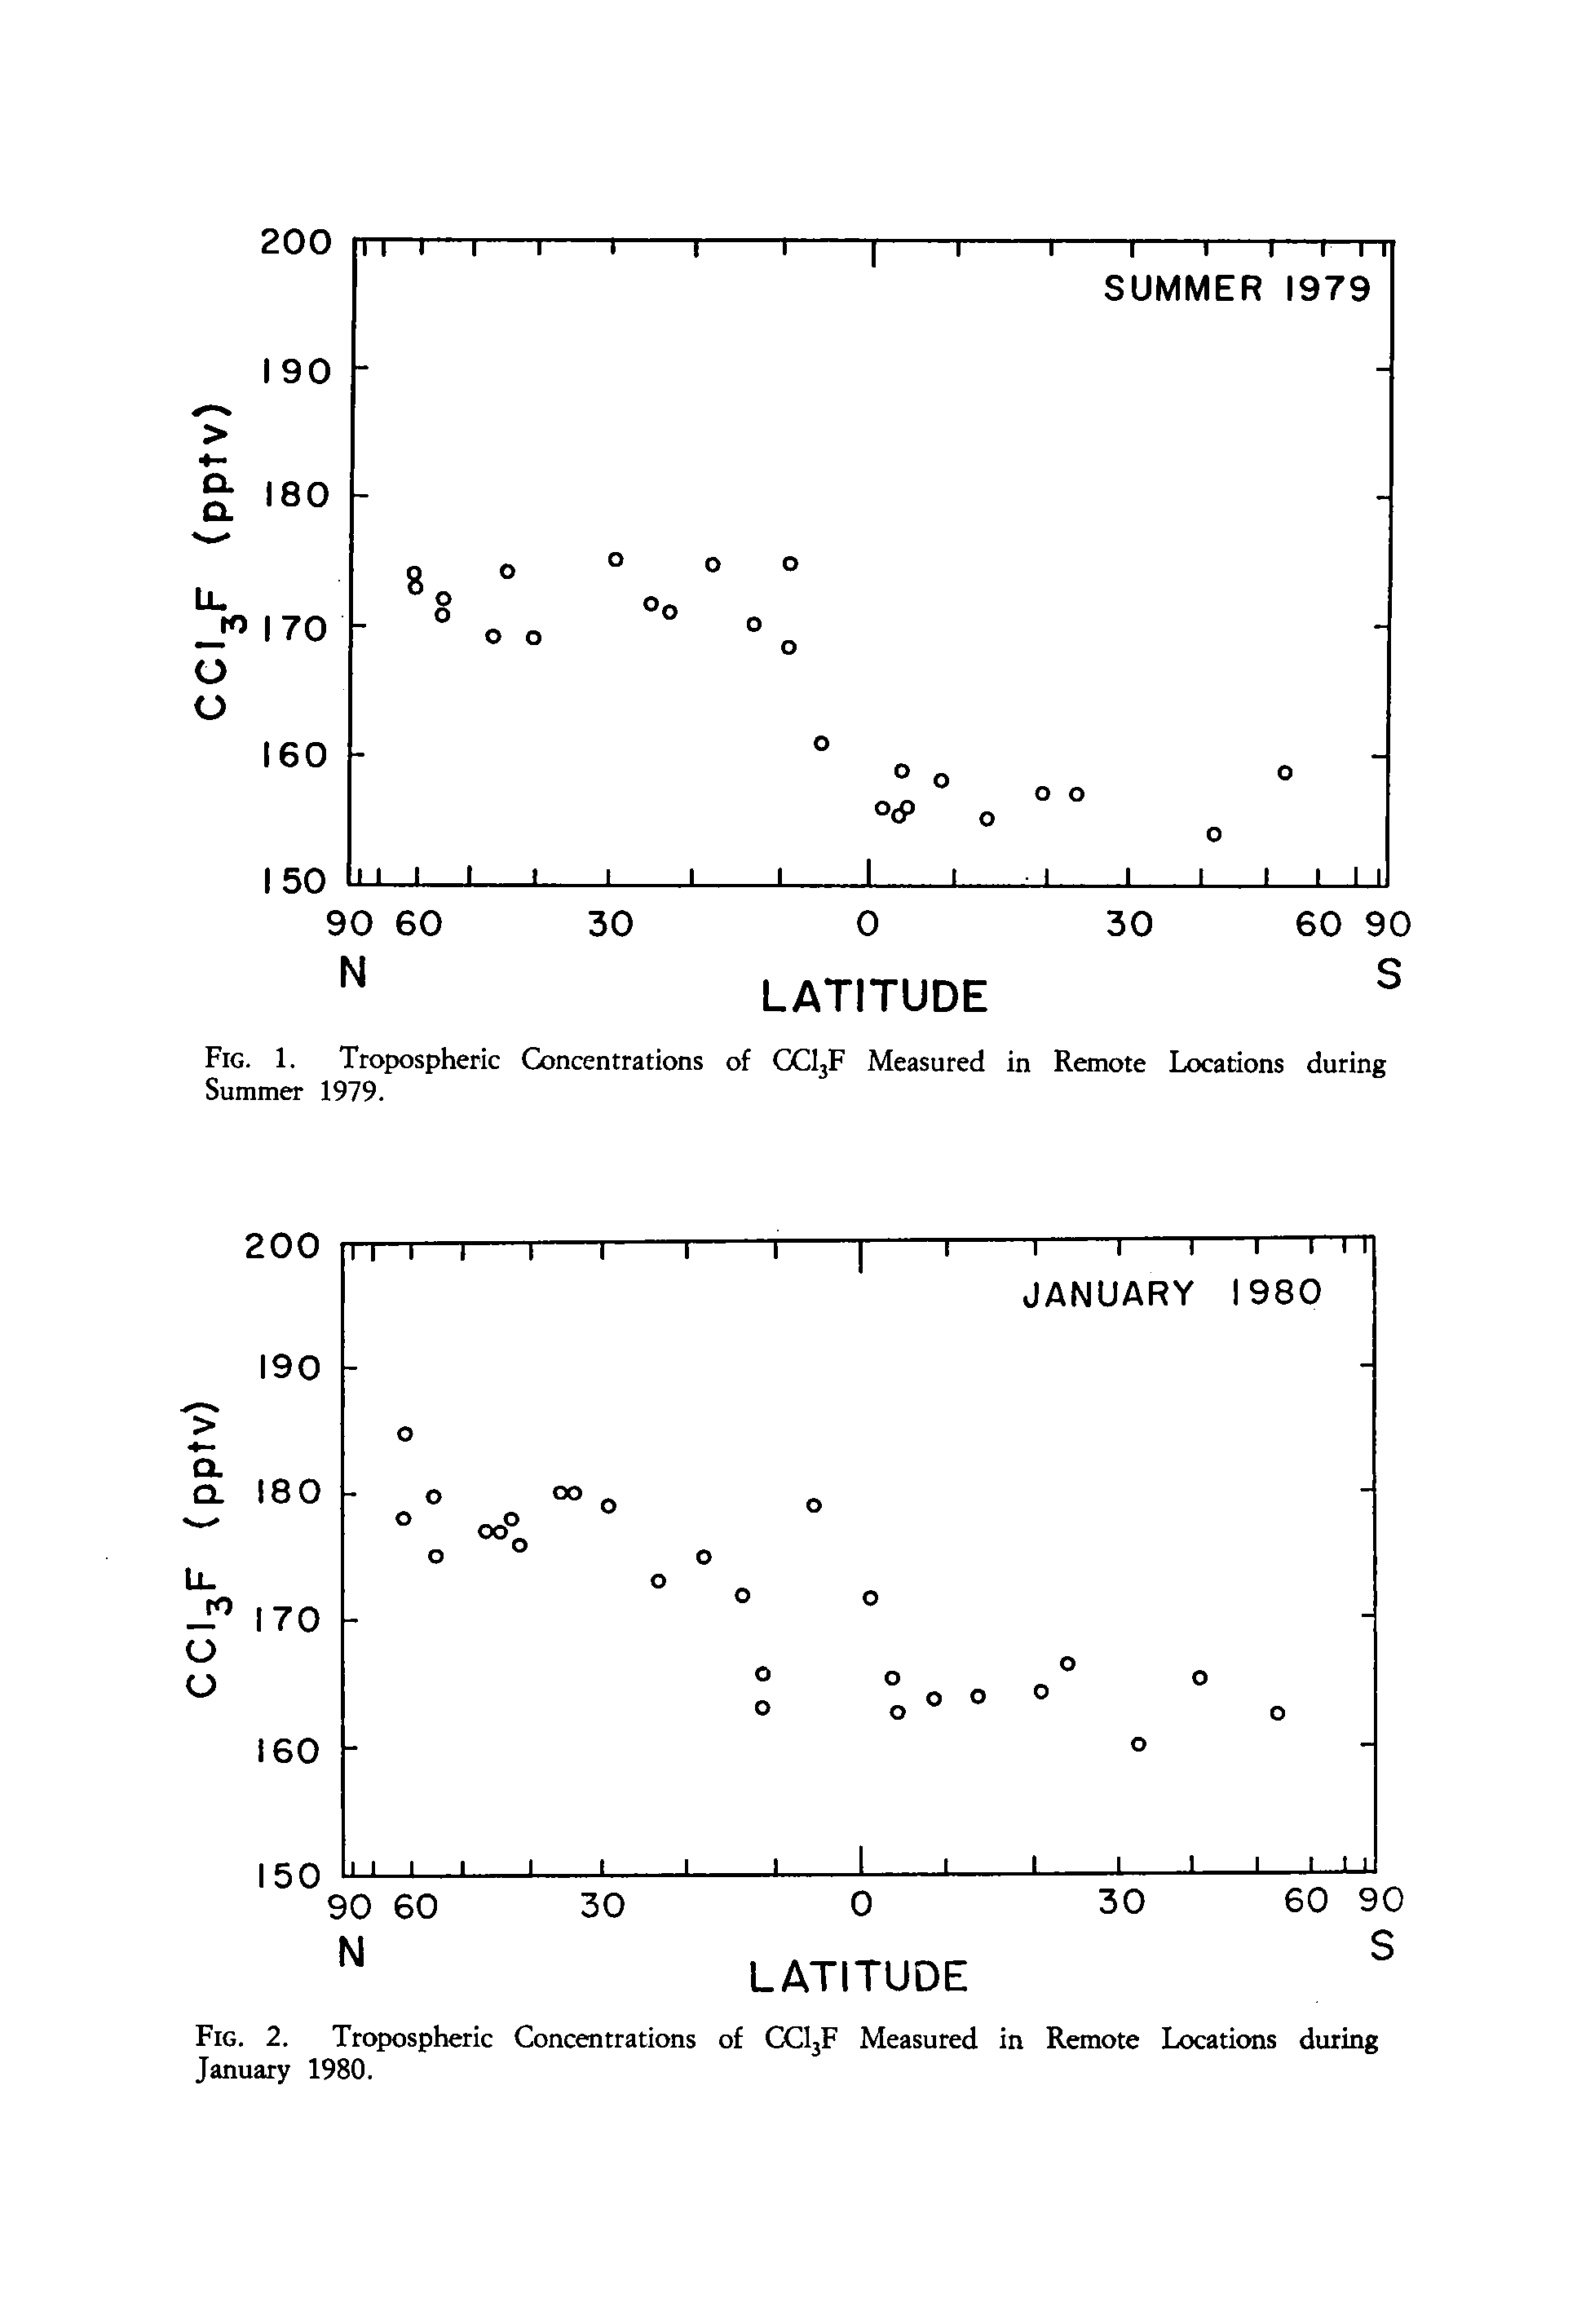 Fig. 1. Tropospheric Concentrations of CCljF Measured in Remote Locations during Summer 1979.